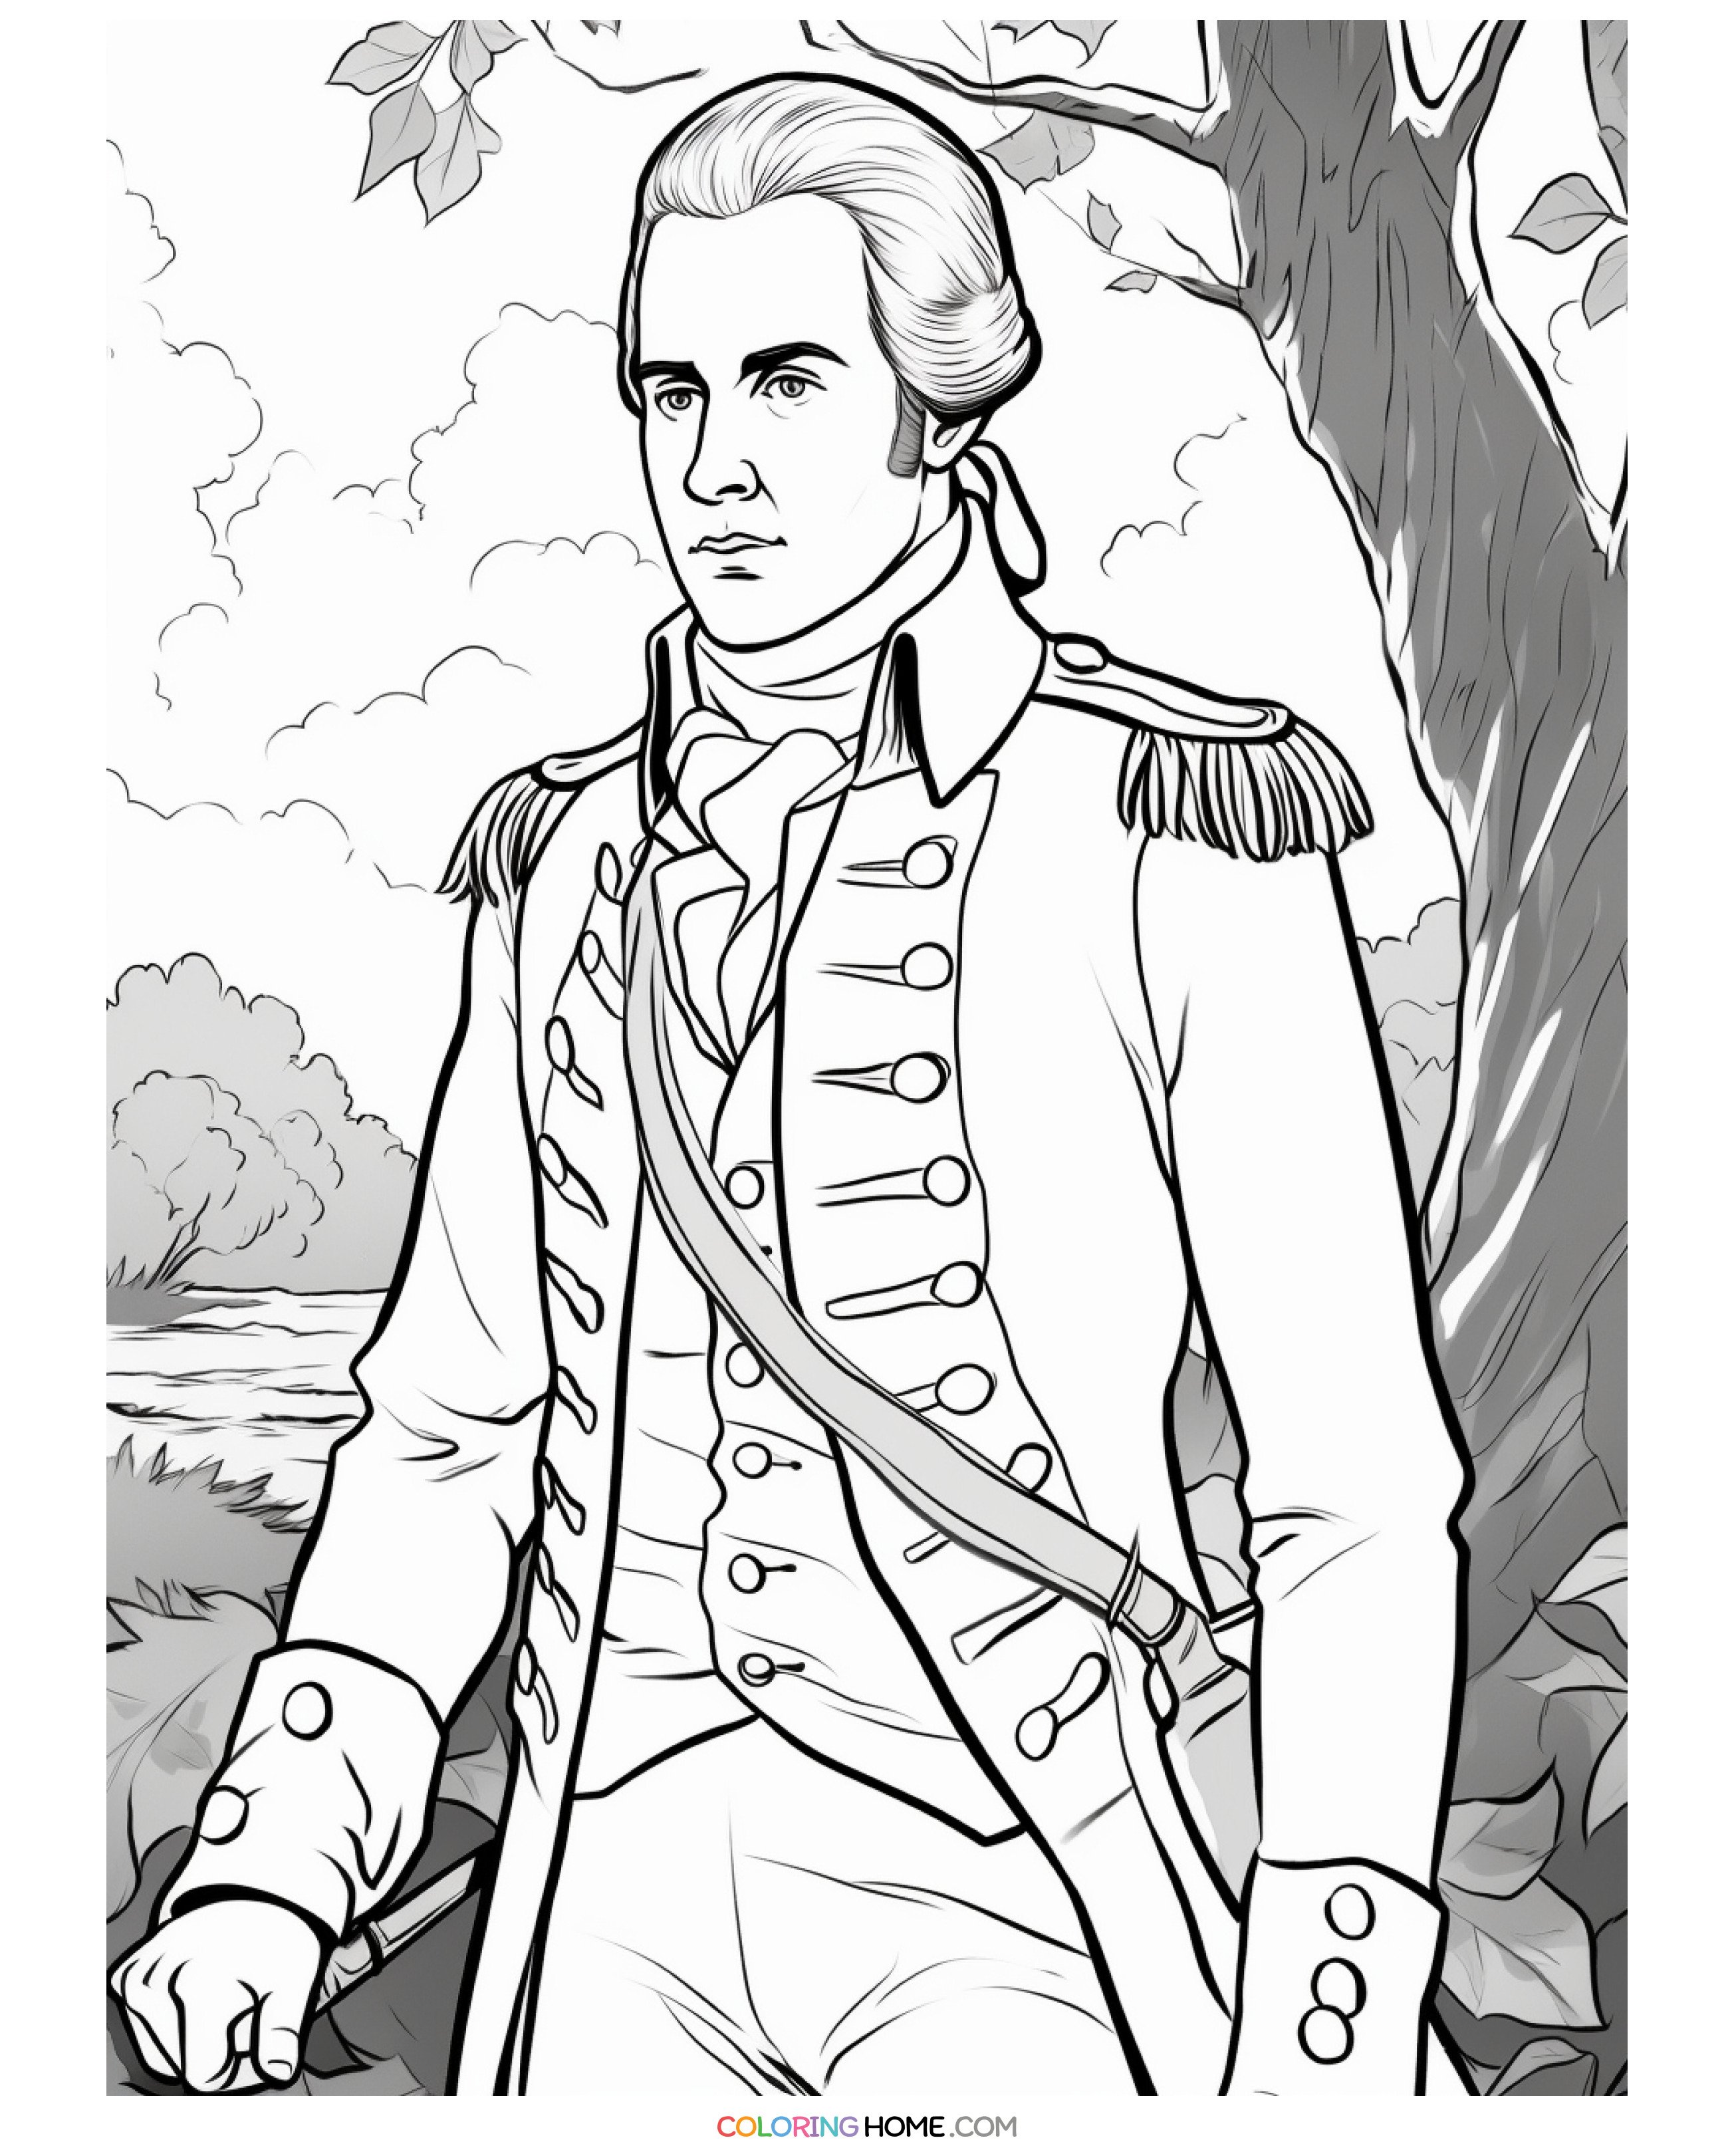 Nathan Hale coloring page